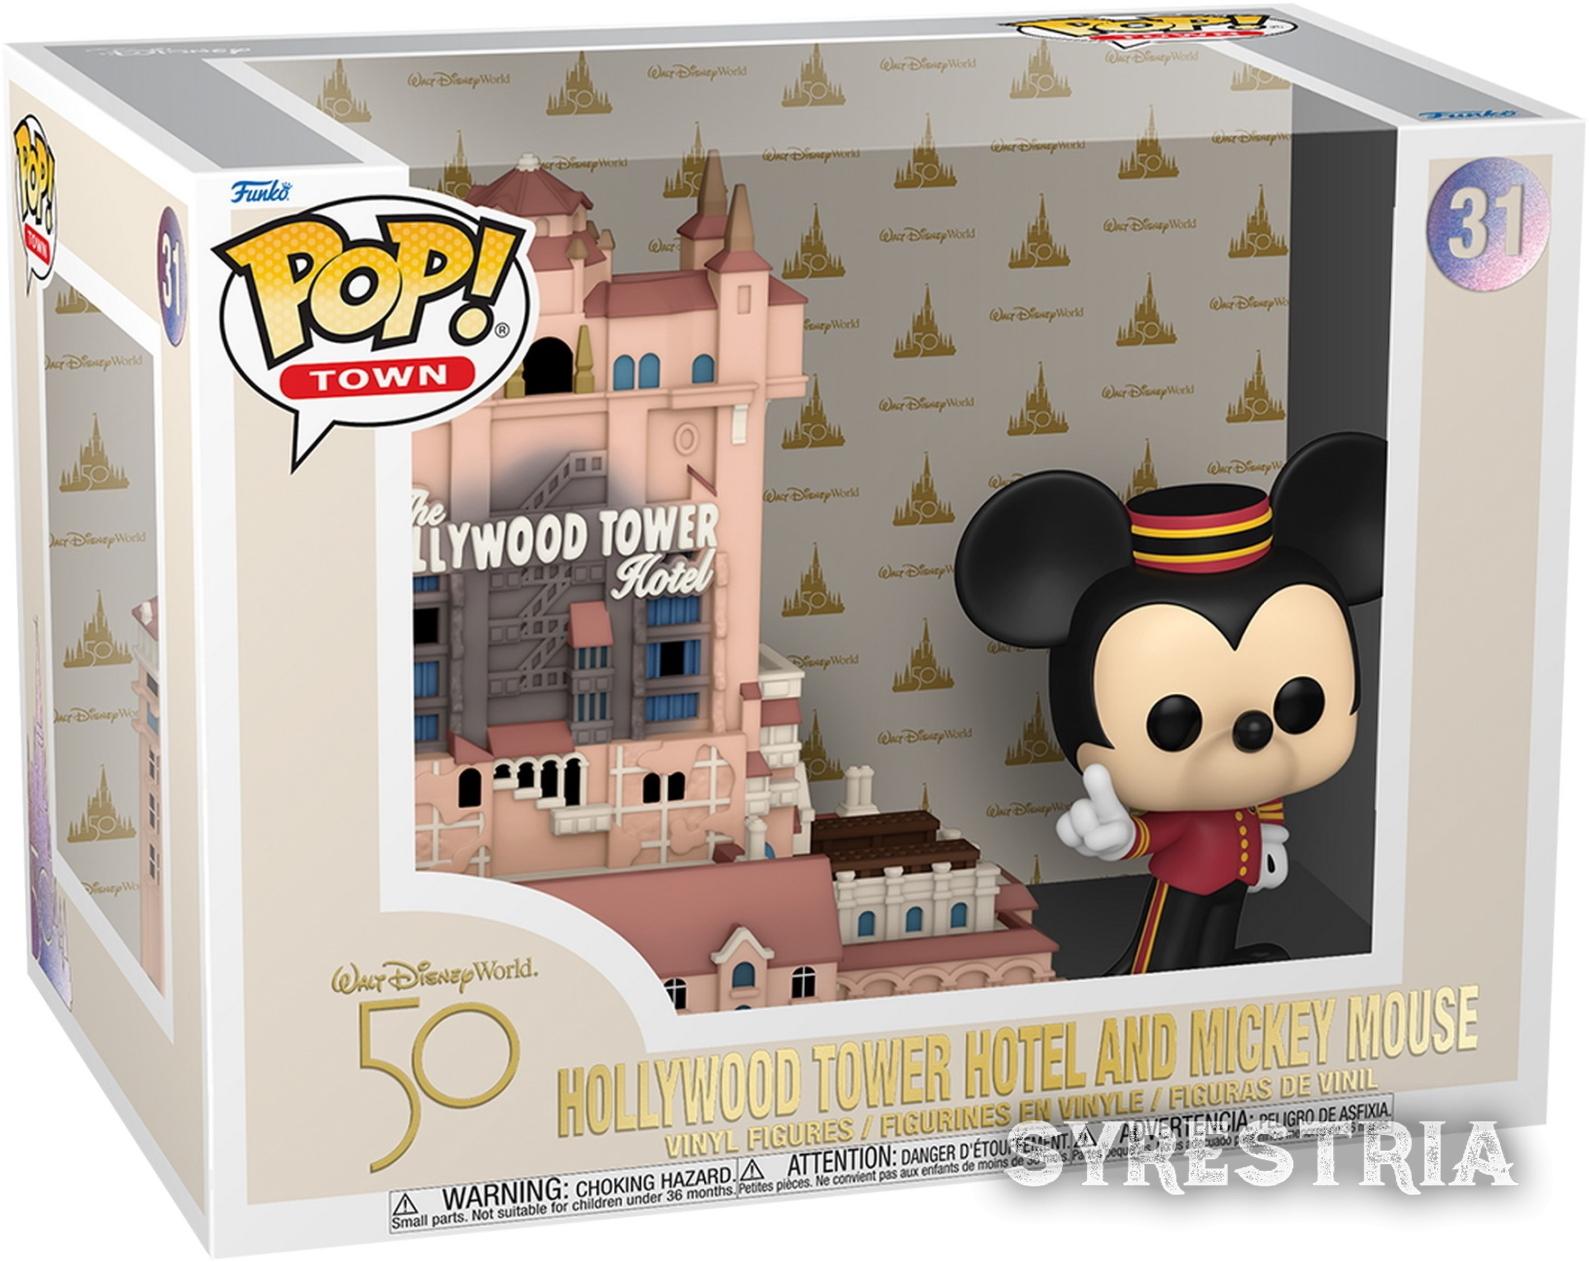 Hollywood Tower Hotel and Mickey Mouse 31 - Funko Pop! Town Vinyl Figur